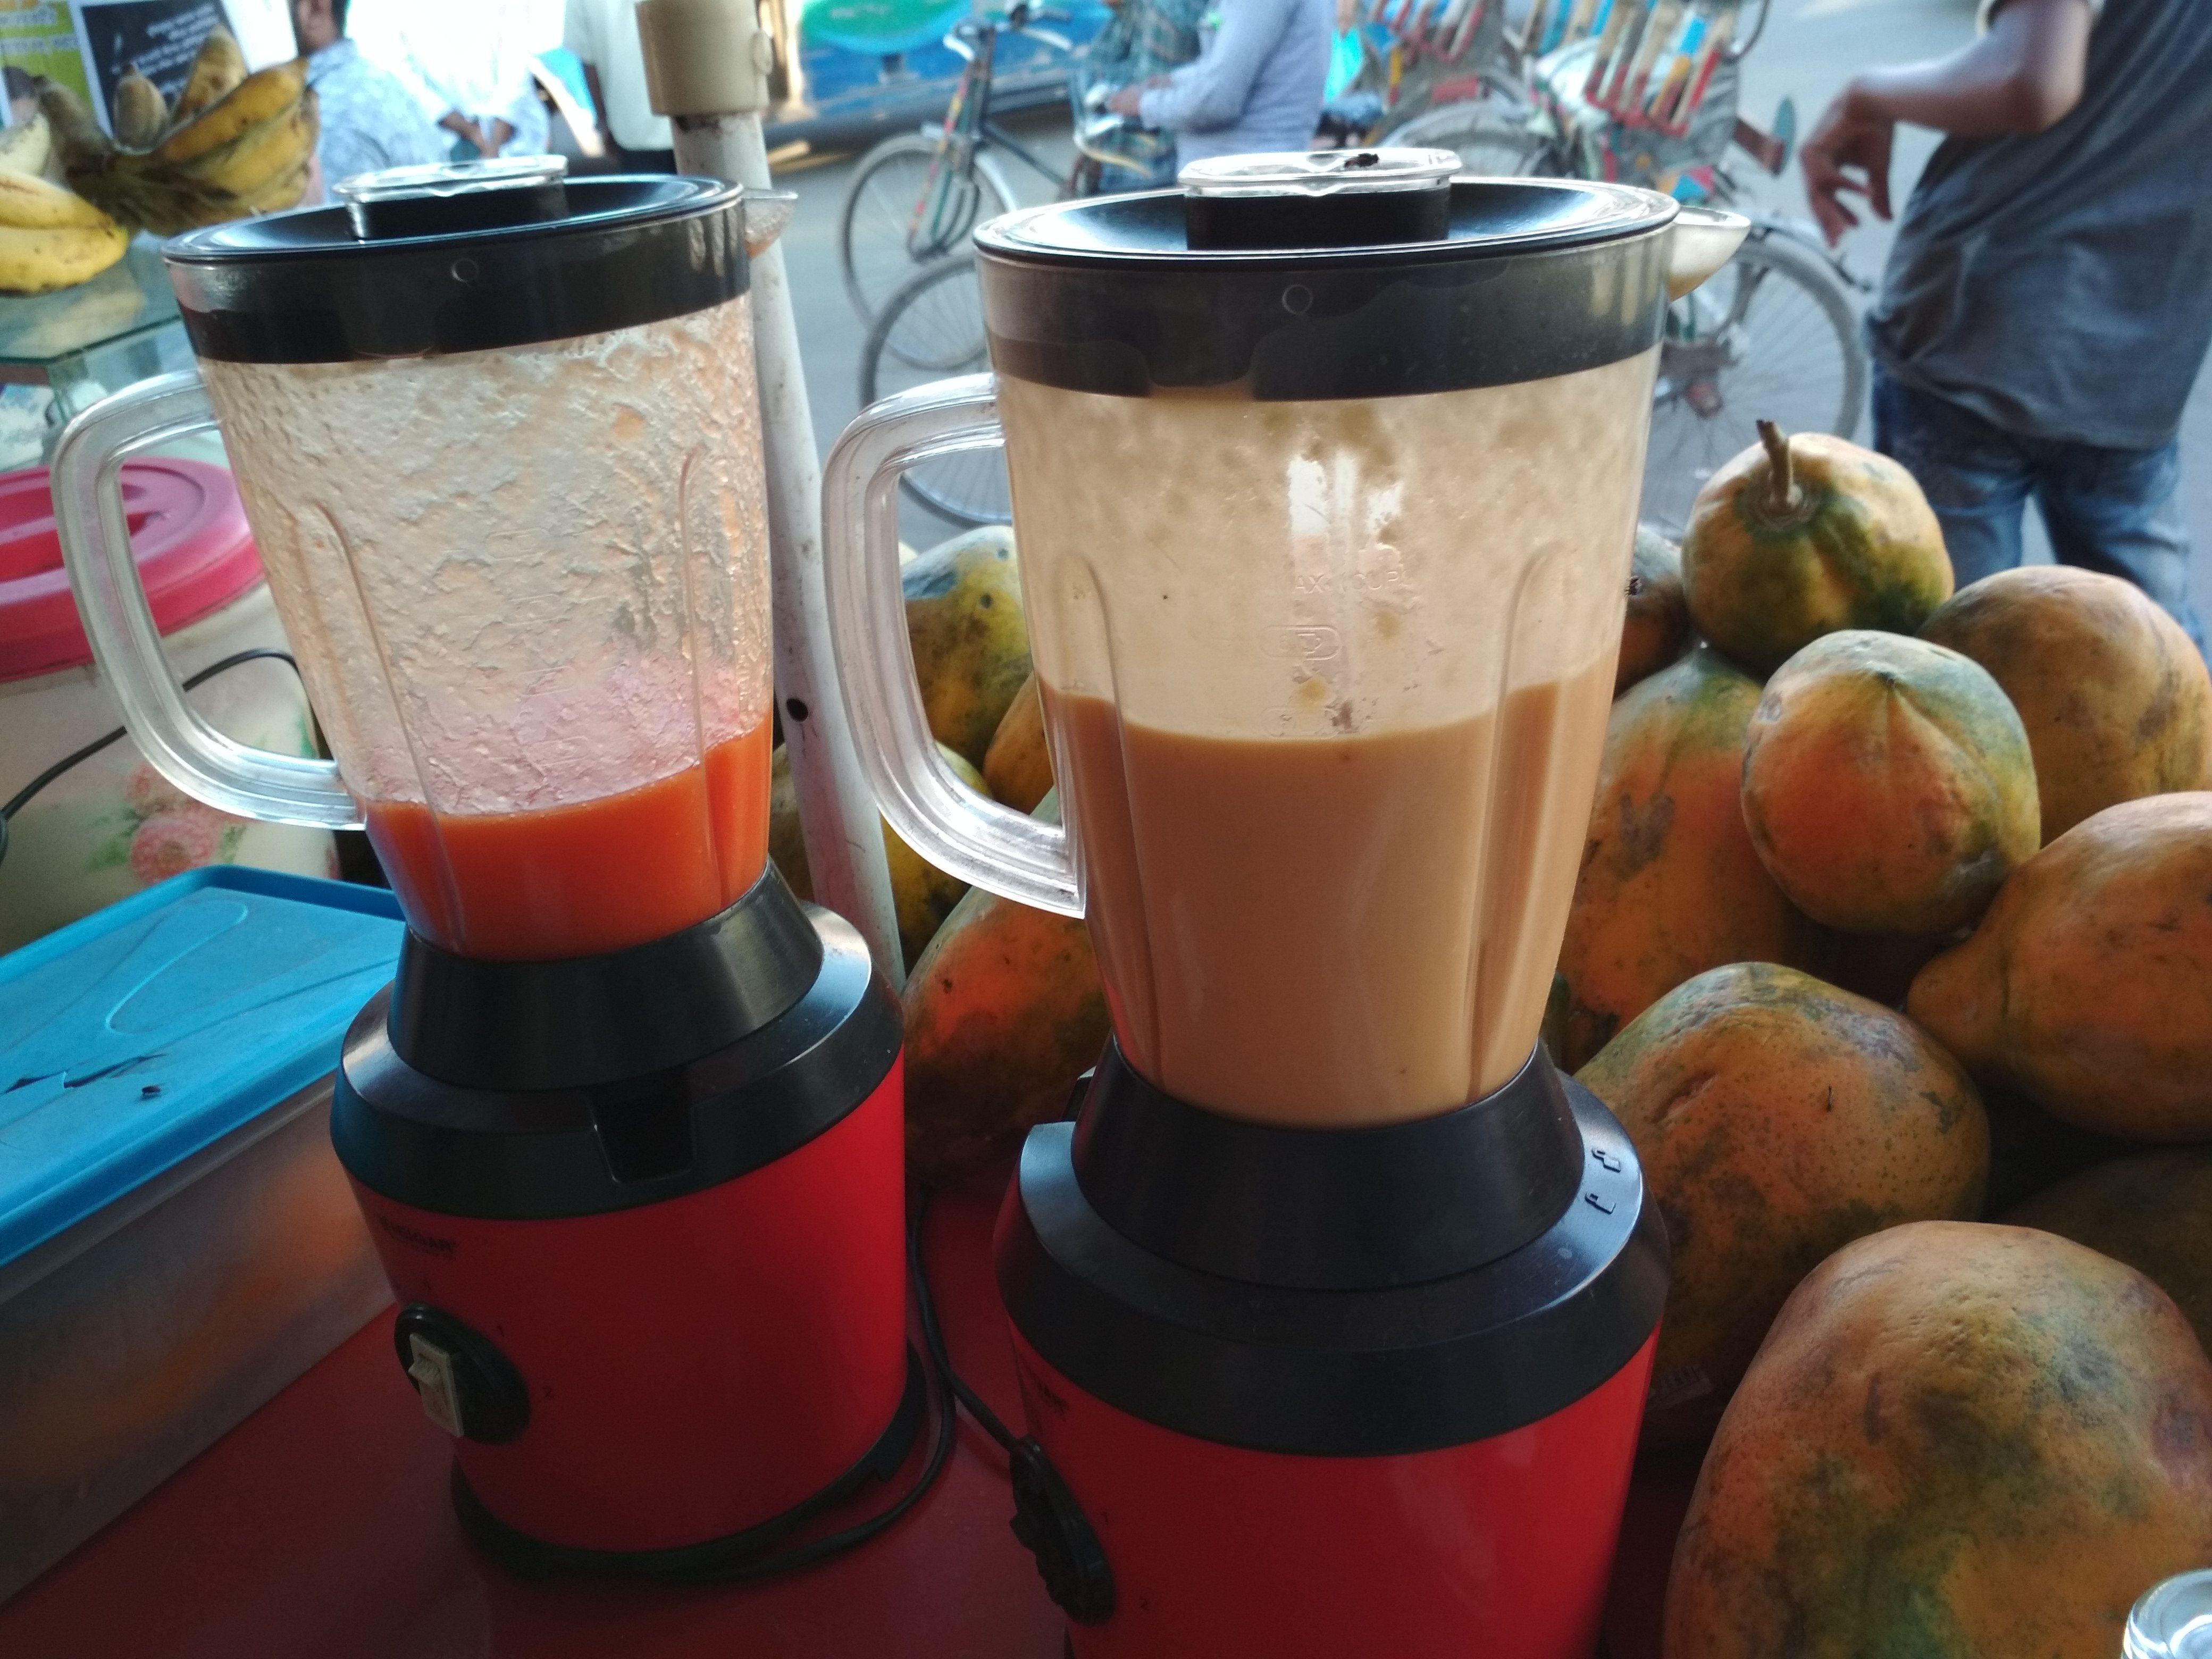 Fruit juices are blended in the jars and waiting fir customers. 1. The red one is a mixture if papya and sugar, 2. The mixed fruit juice. It will make you happy.to drink.